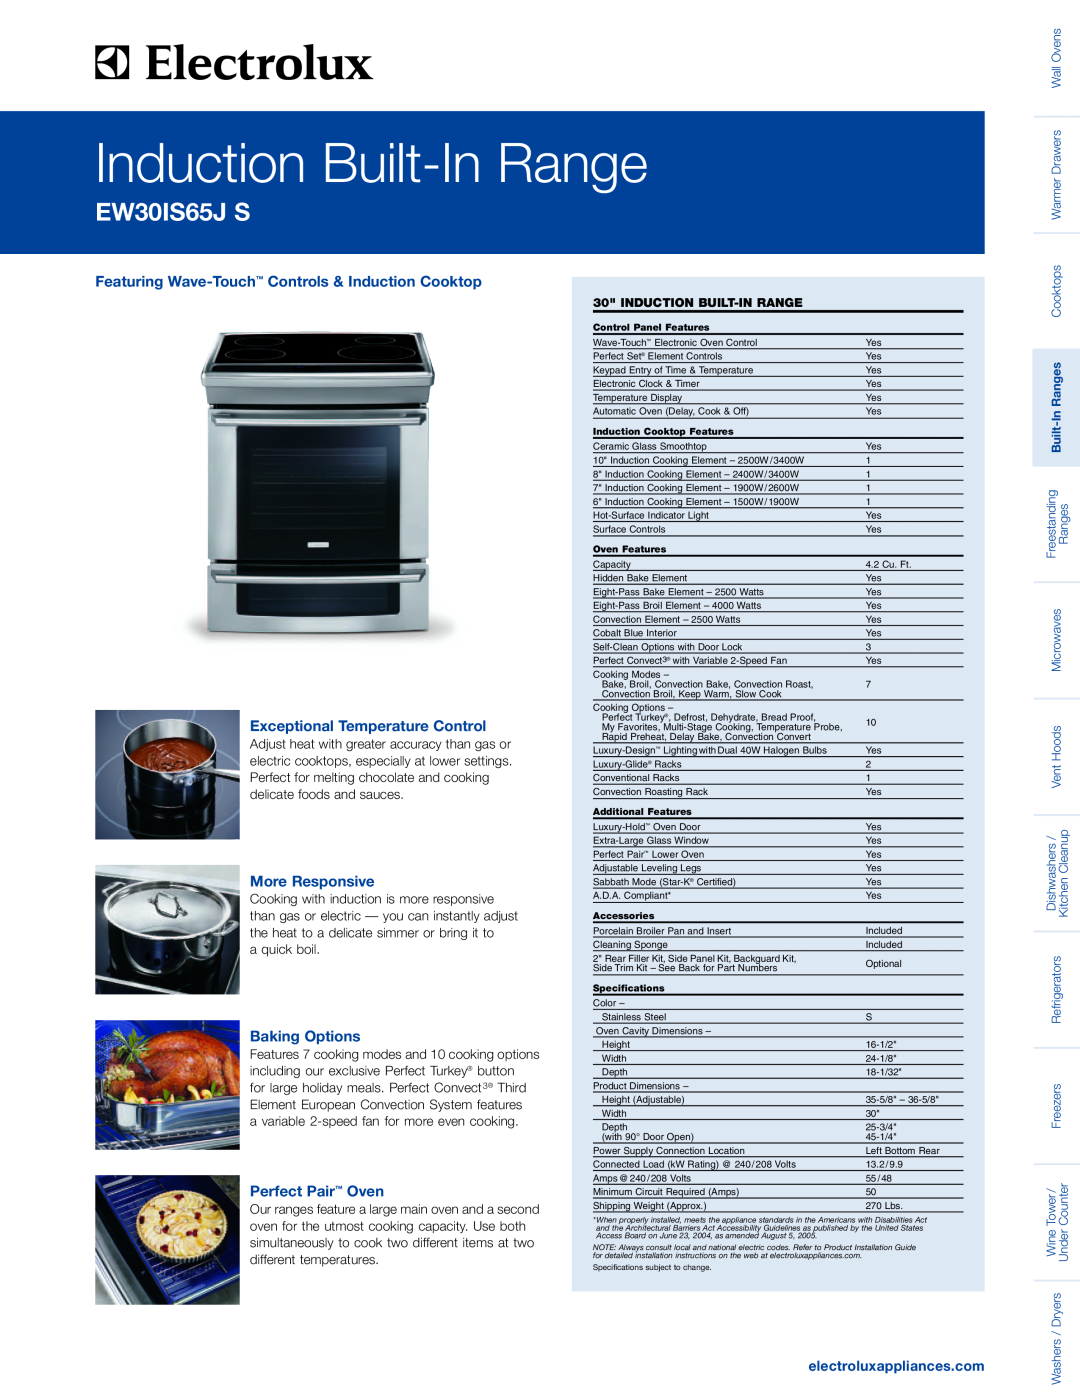 Electrolux EW30IS65JS specifications Featuring Wave-Touch Controls & Induction Cooktop, Exceptional Temperature Control 